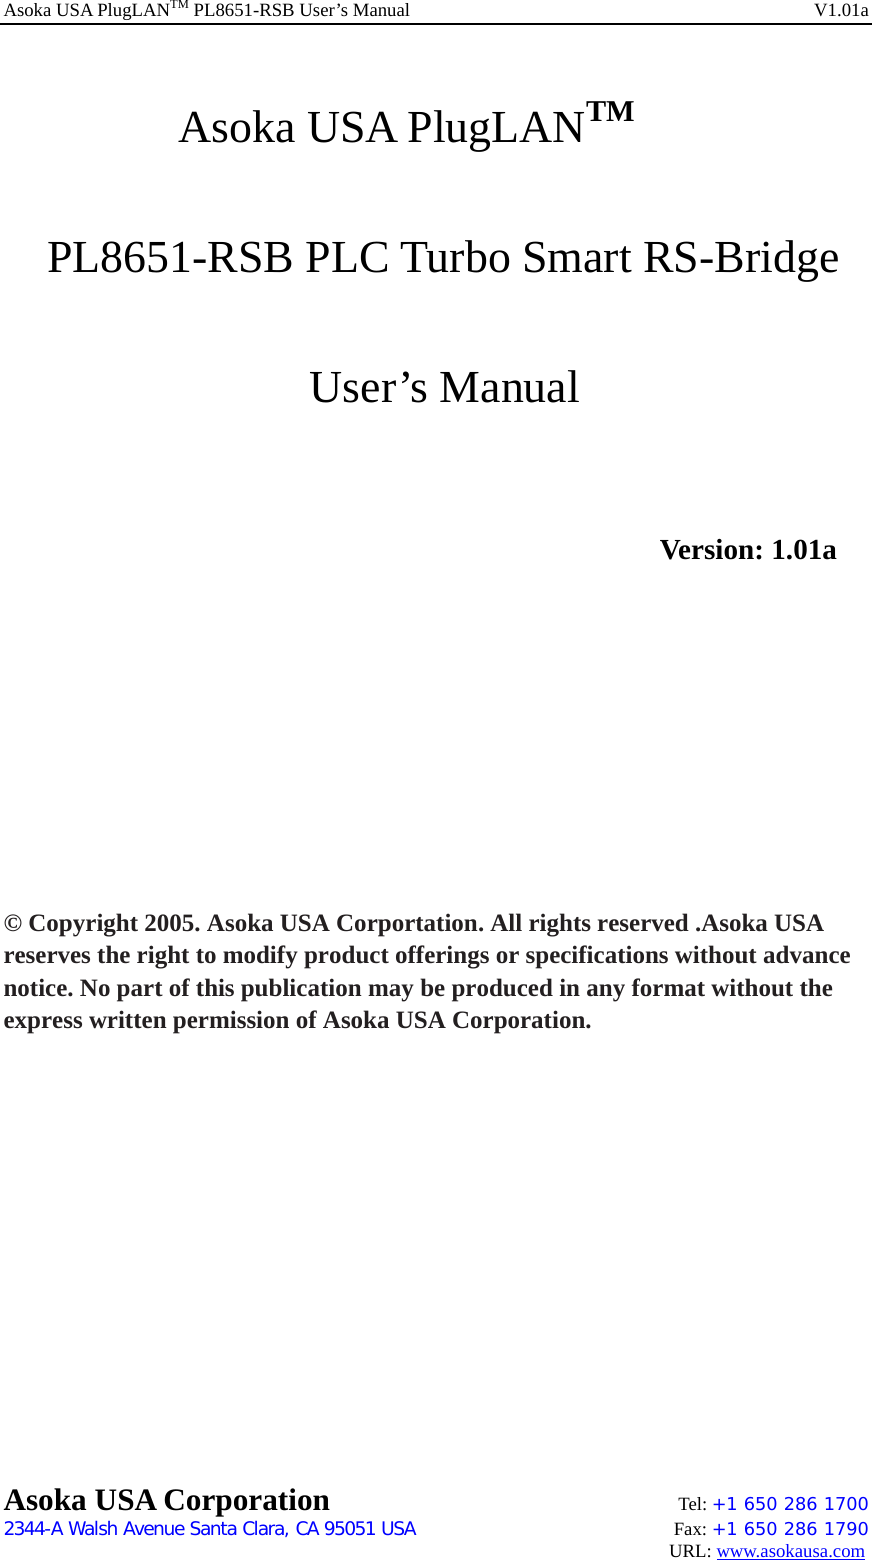 Asoka USA PlugLANTM PL8651-RSB User’s Manual    V1.01a      Asoka USA PlugLANTM    PL8651-RSB PLC Turbo Smart RS-Bridge         User’s Manual                    Version: 1.01a           © Copyright 2005. Asoka USA Corportation. All rights reserved .Asoka USA reserves the right to modify product offerings or specifications without advance notice. No part of this publication may be produced in any format without the express written permission of Asoka USA Corporation.              Asoka USA Corporation    Tel: +1 650 286 1700    2344-A Walsh Avenue Santa Clara, CA 95051 USA   Fax: +1 650 286 1790                                                                                     URL: www.asokausa.com 